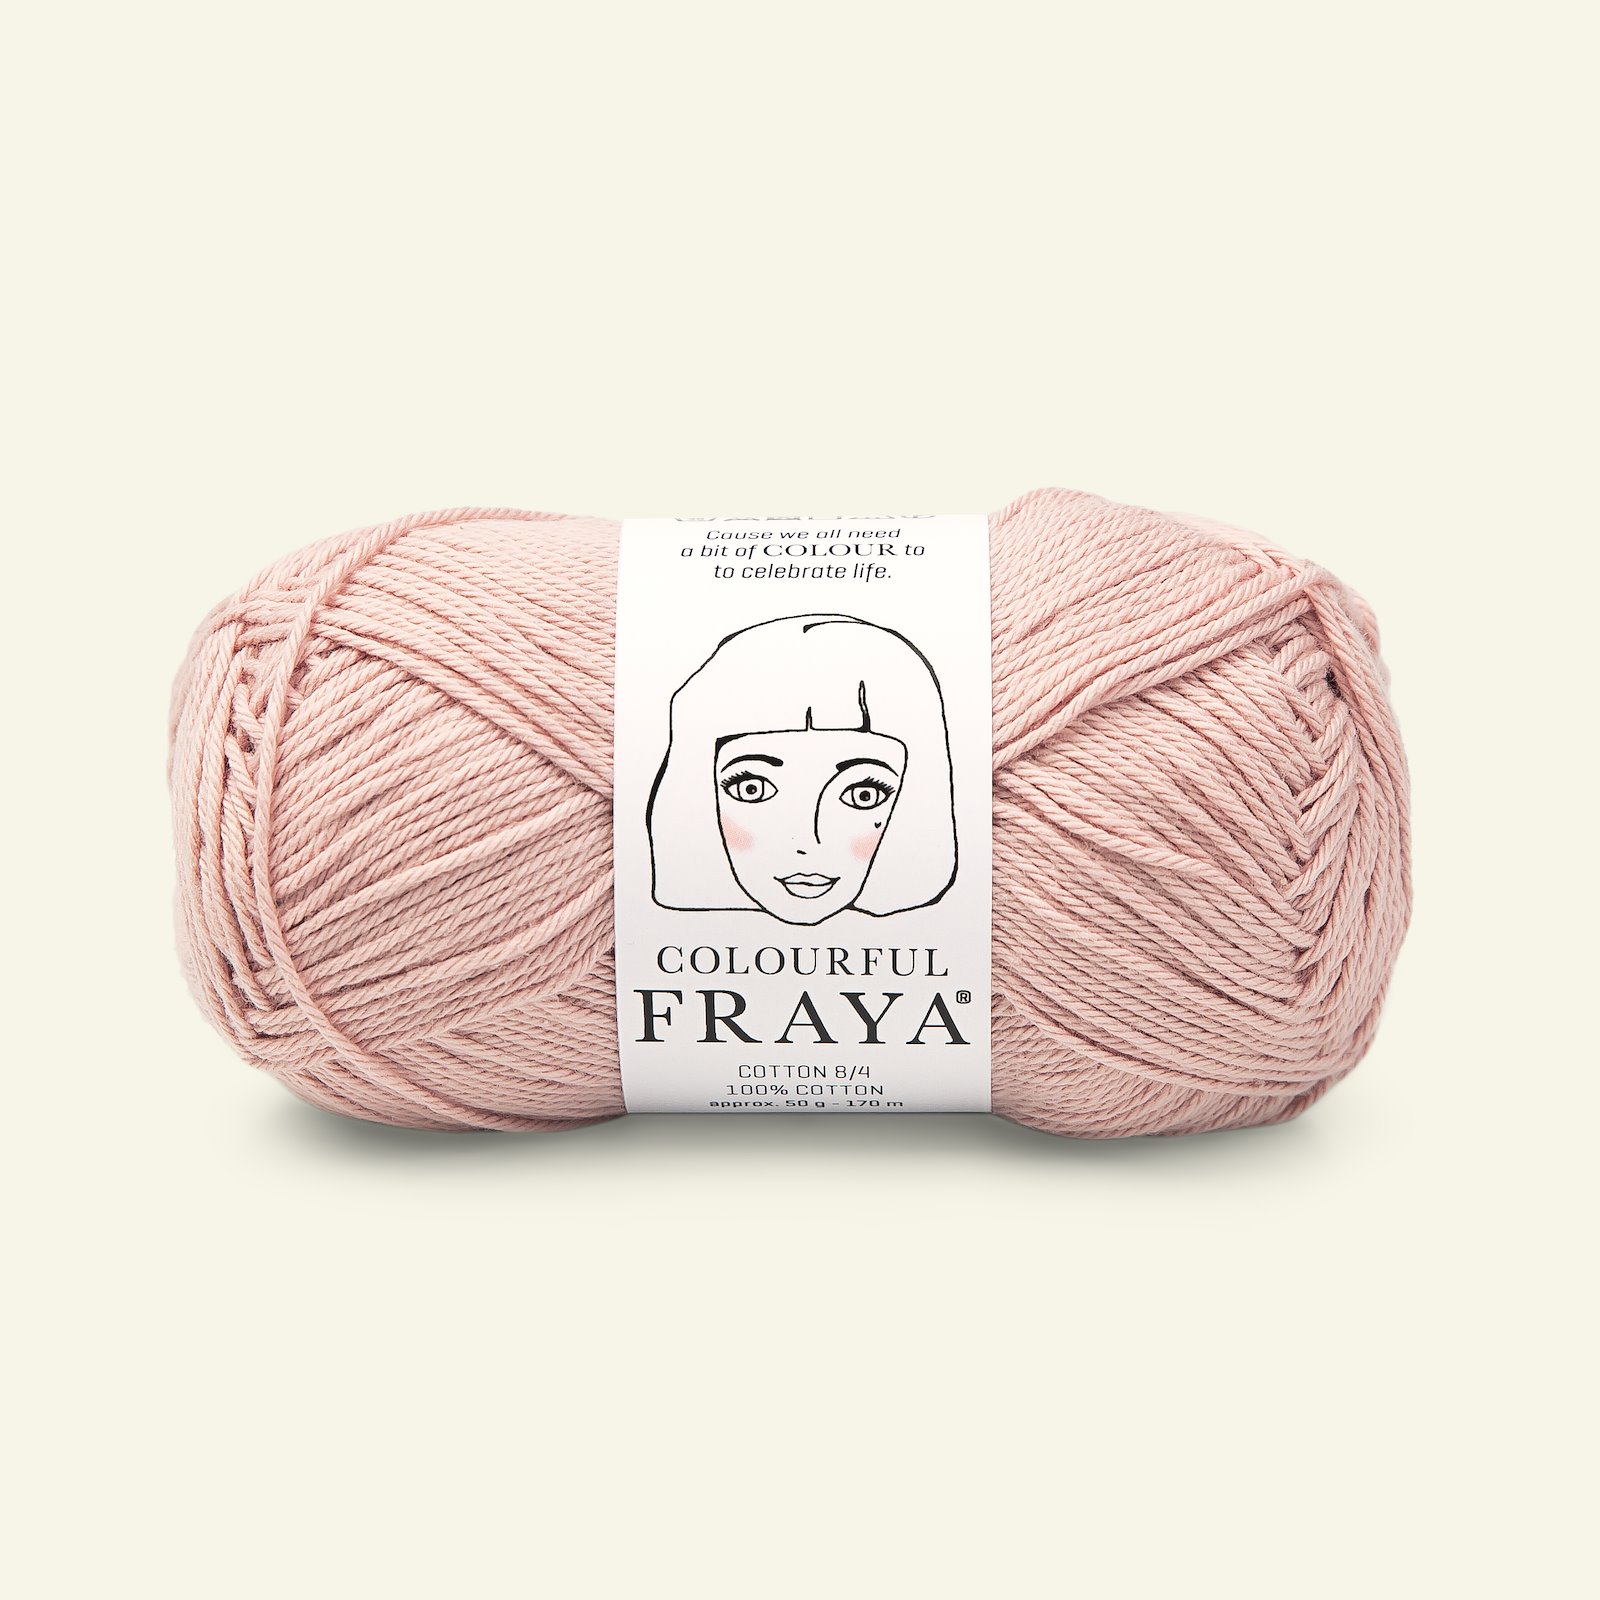 Colourful, 50g, dusty rose 90060089_pack